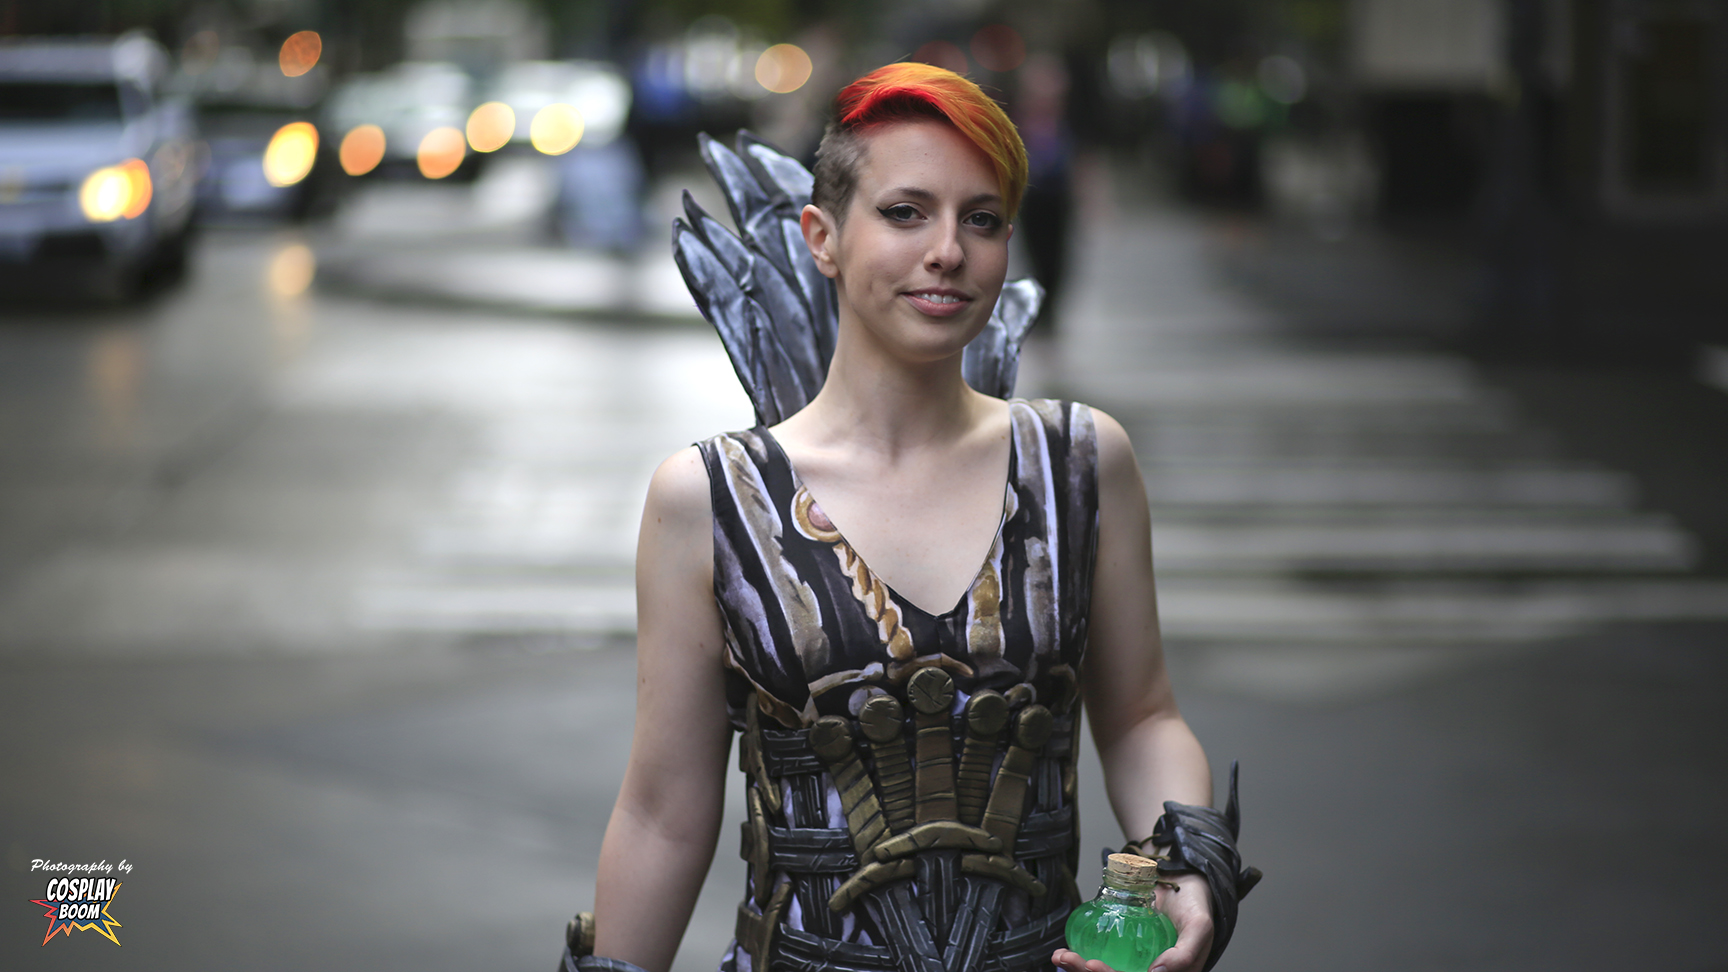 The Coolest Cosplay From Geek Girl Con